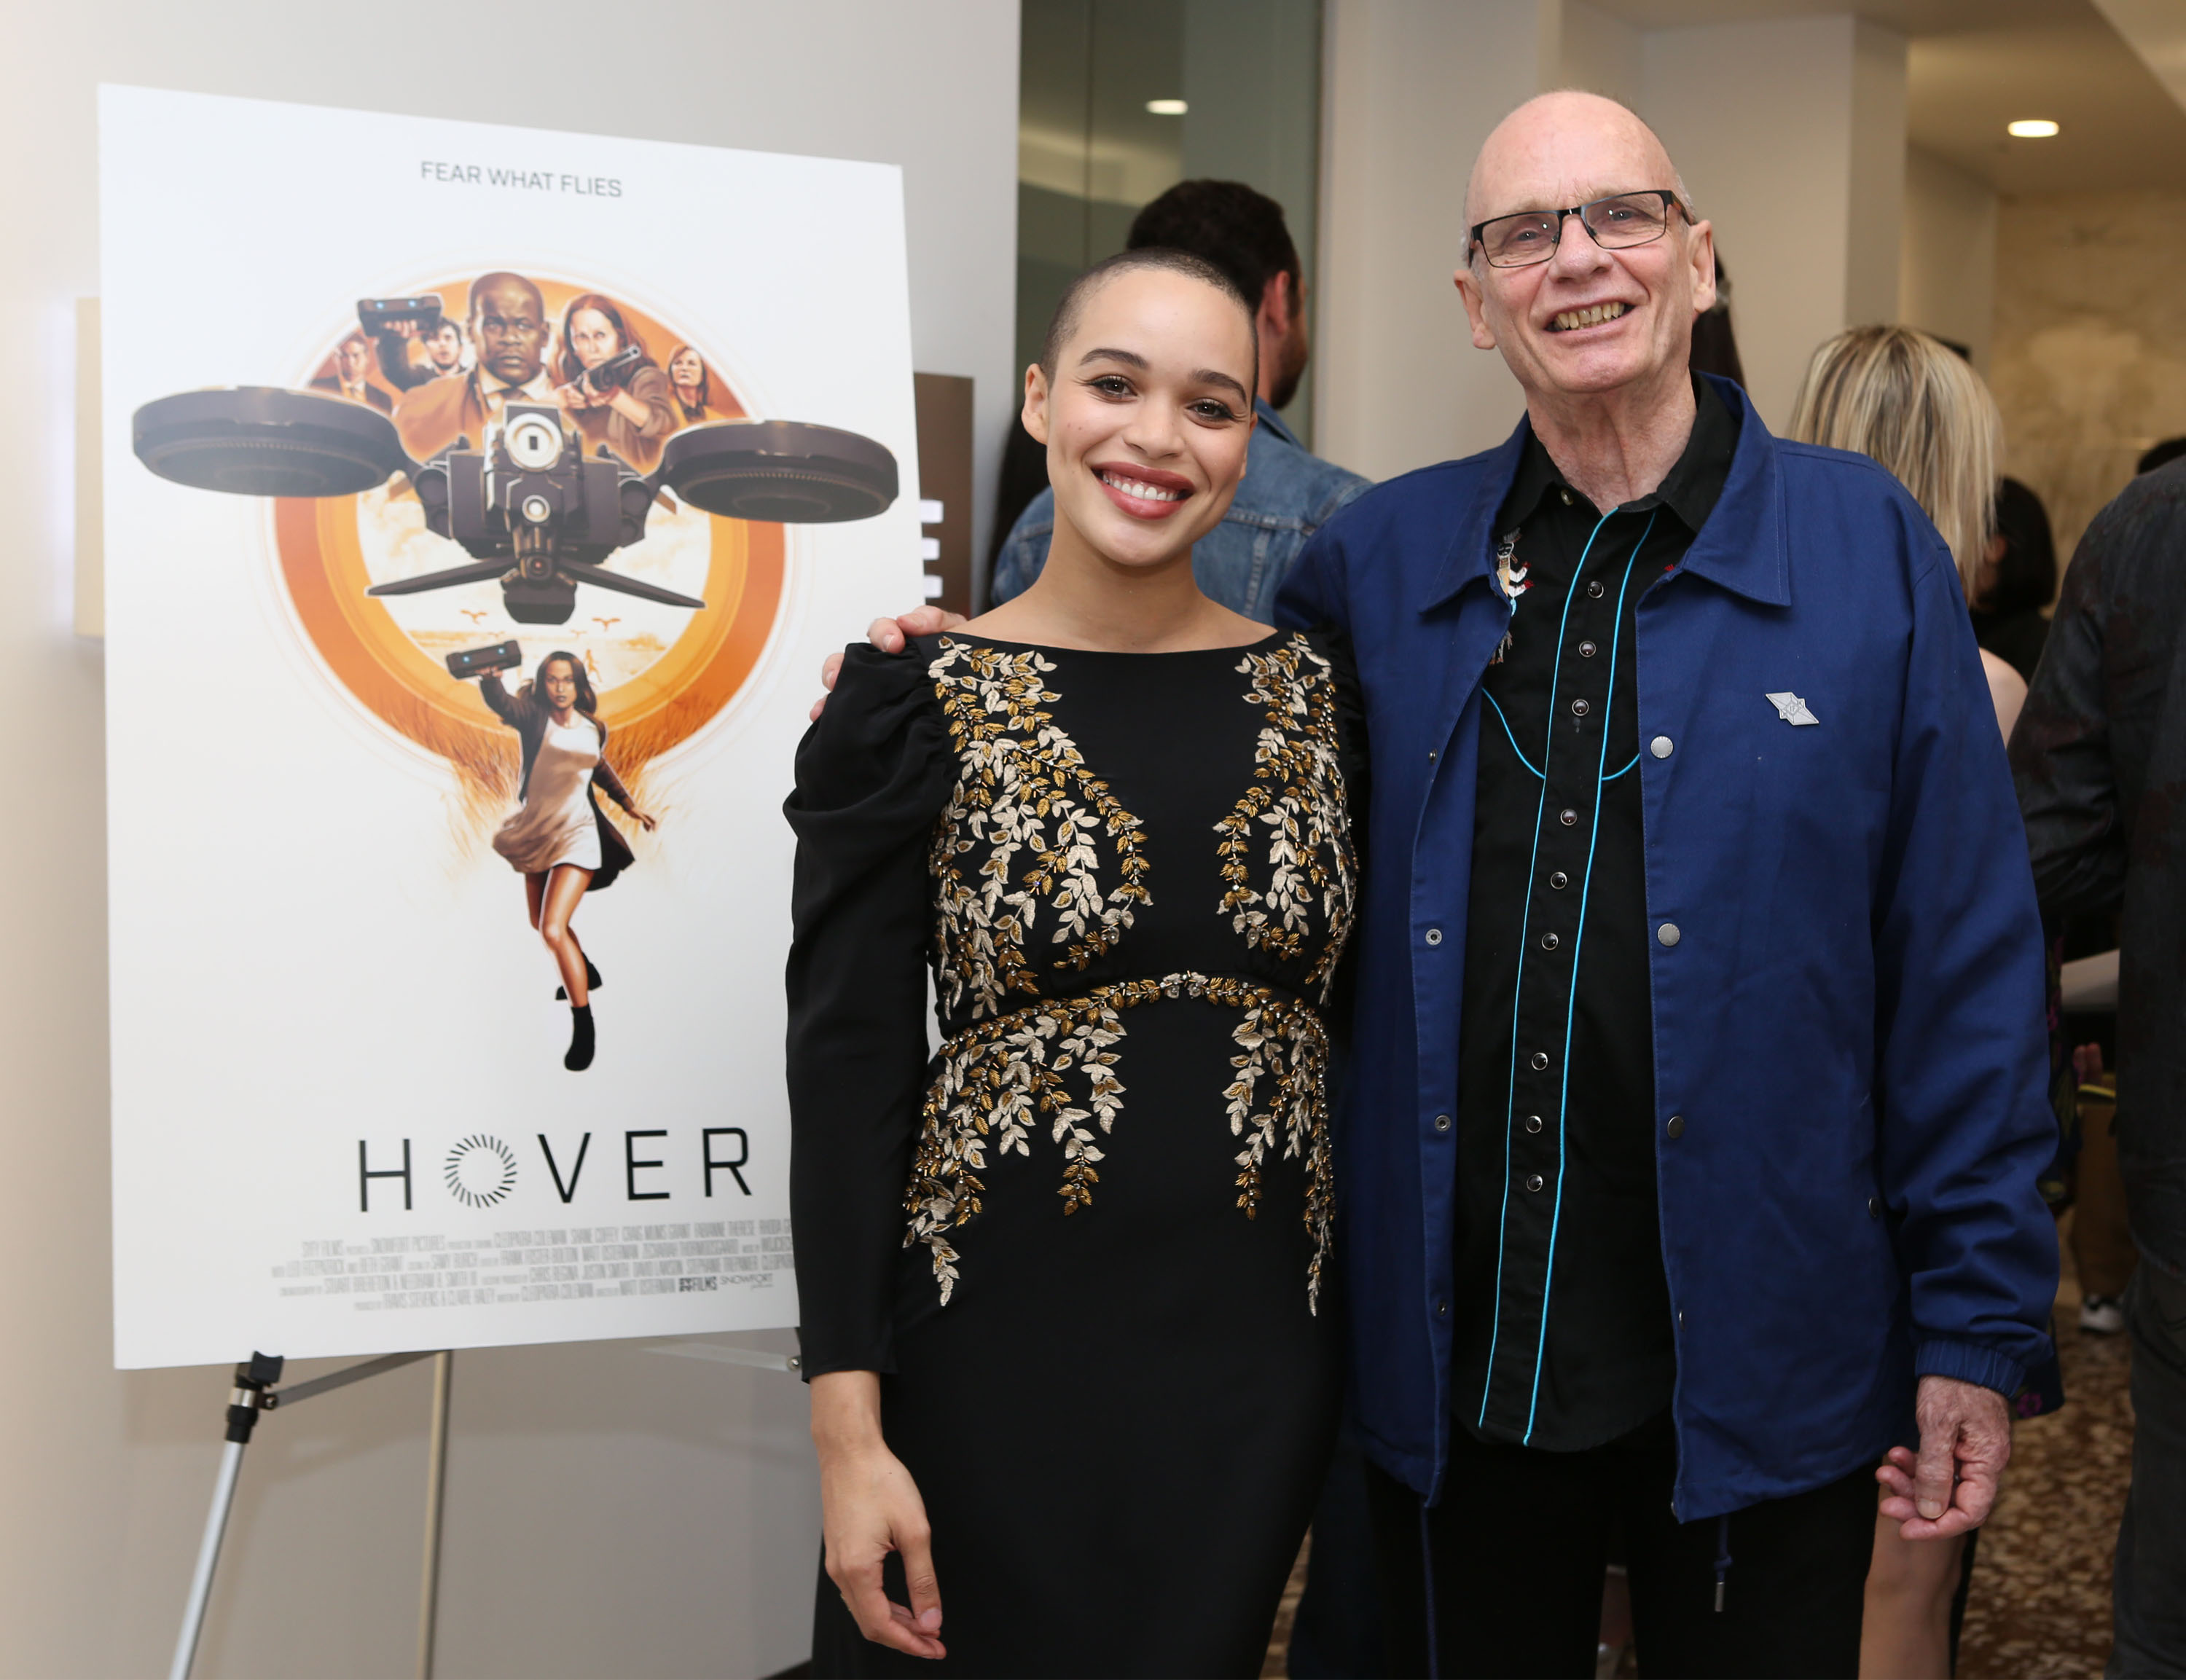 Cleopatra Coleman (L) and her father, Mick Coleman, attend the "Hover" Los Angeles premiere screening at Arena Cinelounge on June 29, 2018, in Hollywood, California. | Source: Getty Images